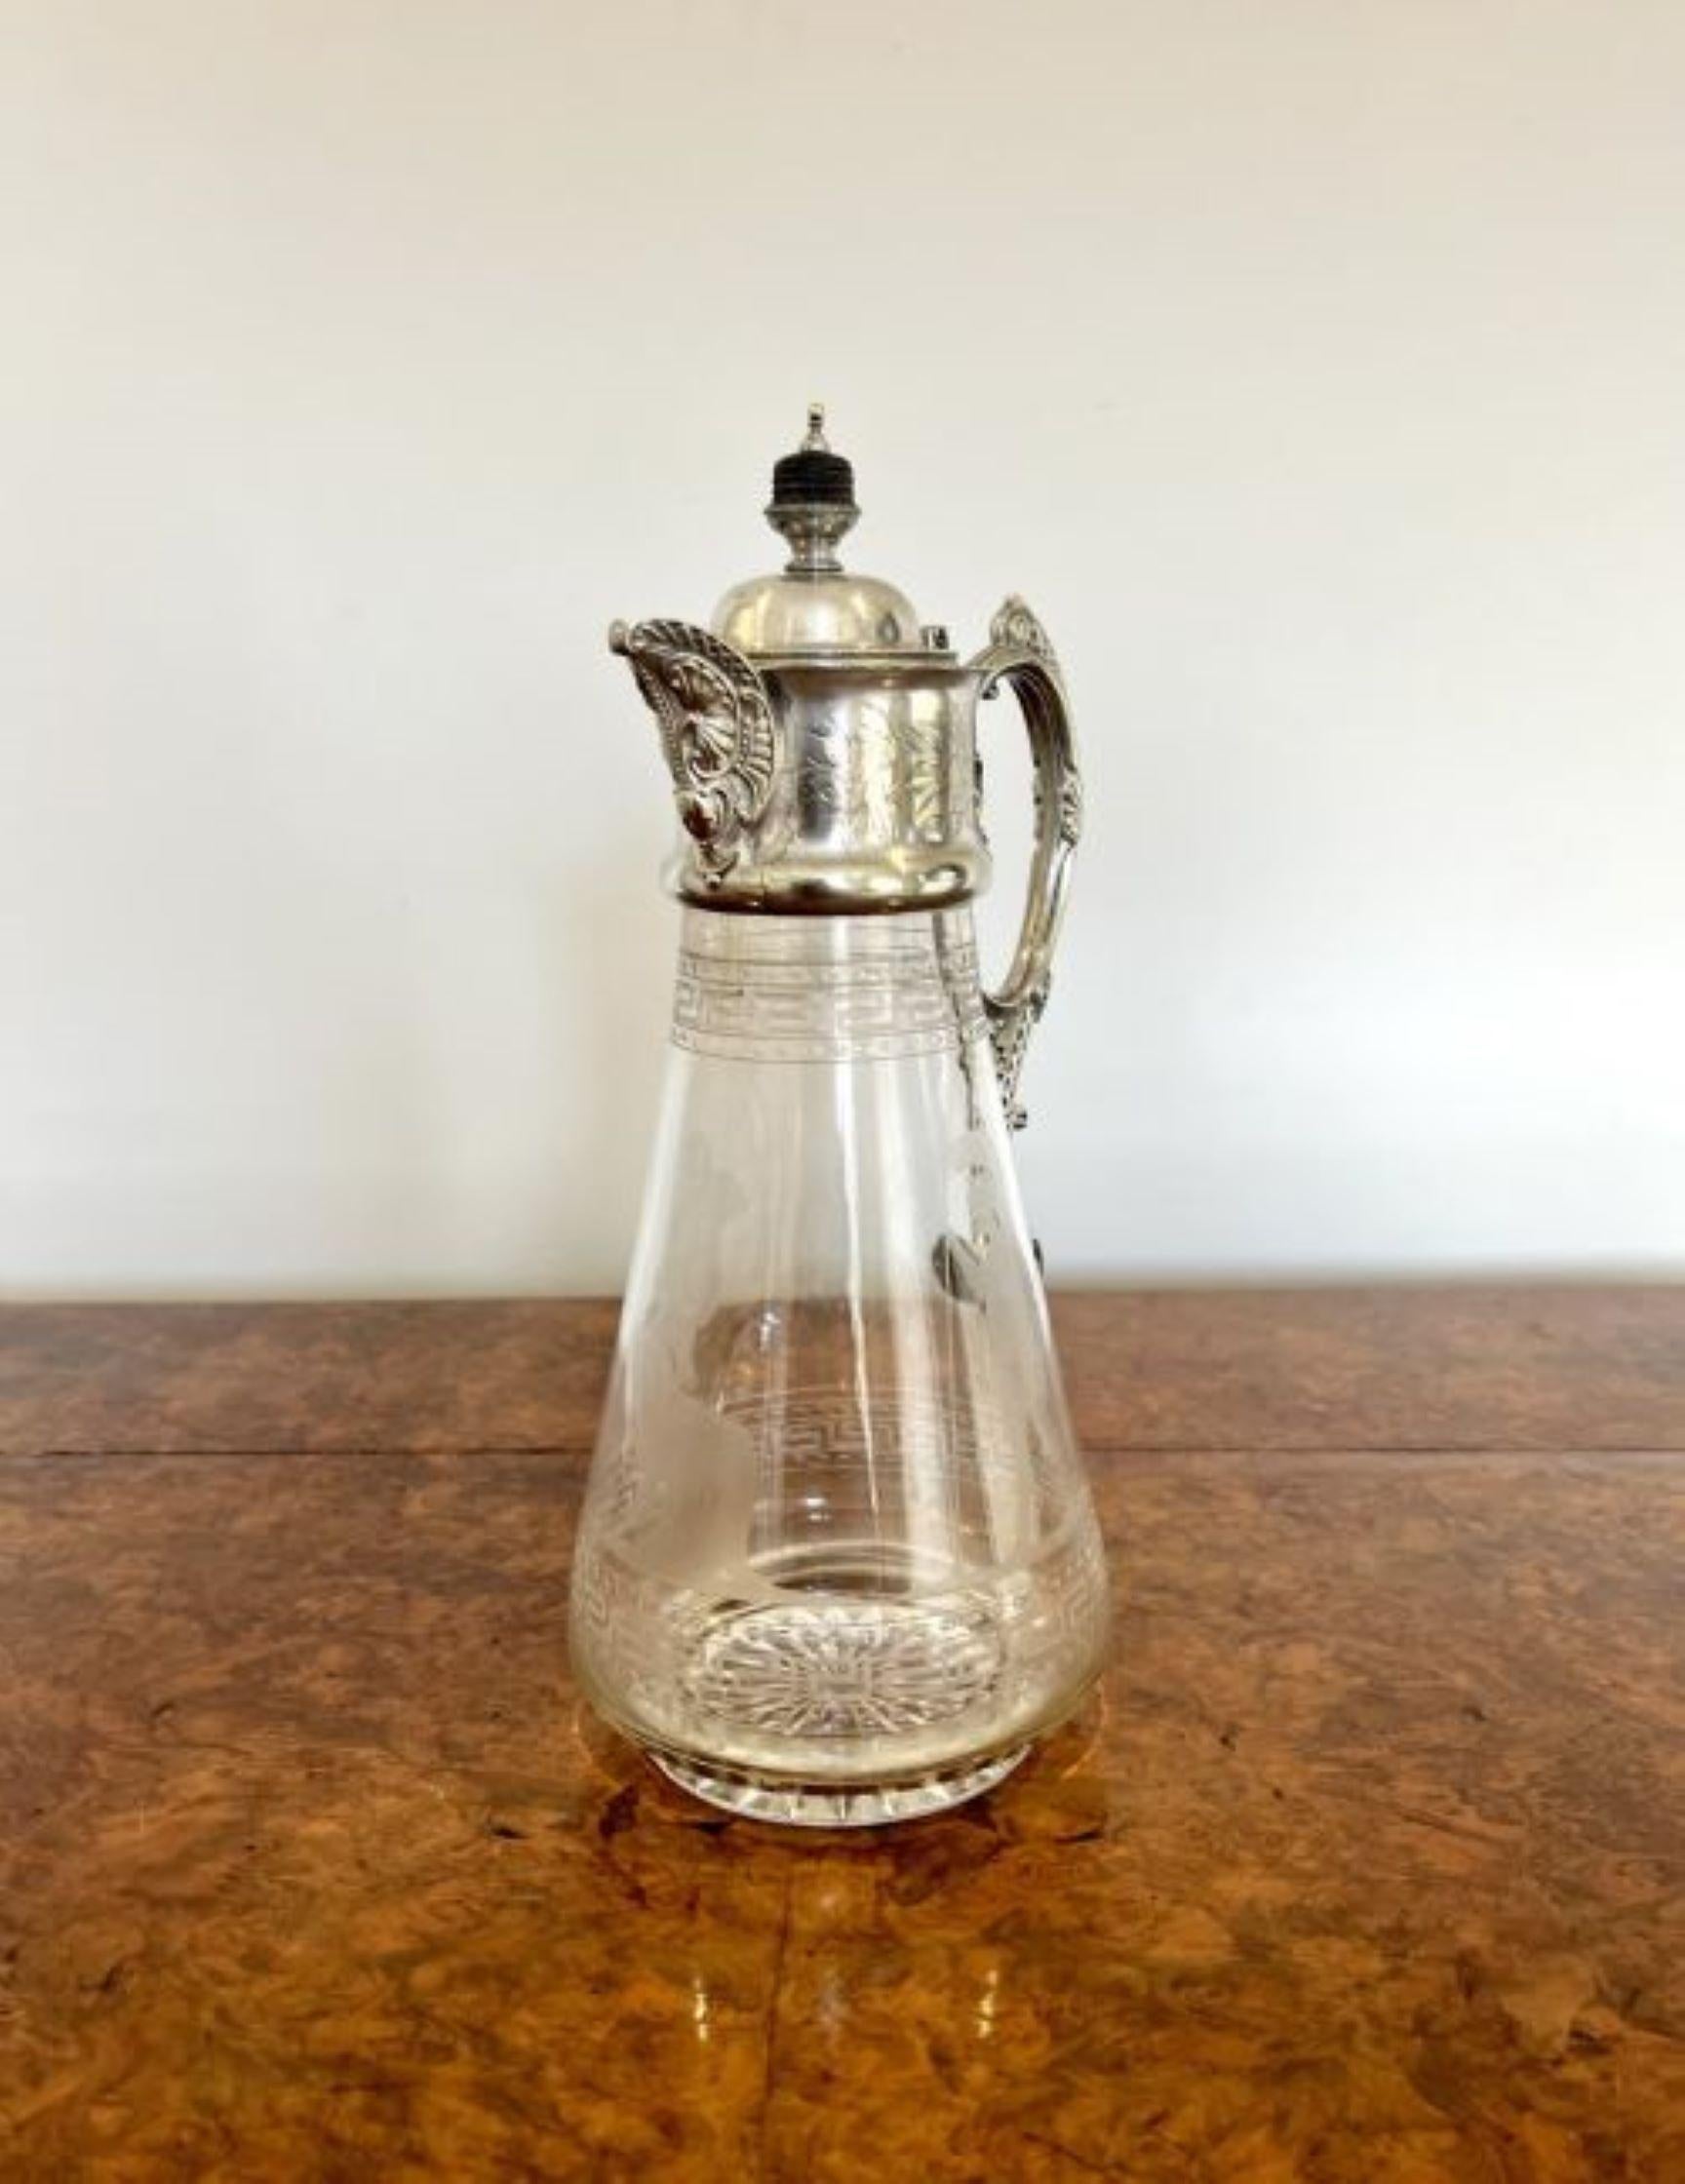 Superb quality antique Victorian glass and silver plated claret jug having a superb quality claret jug with a silver plated top, fantastic  ornate silver plated shaped spout and handle, above a fantastic engraved glass base with patterns and figures